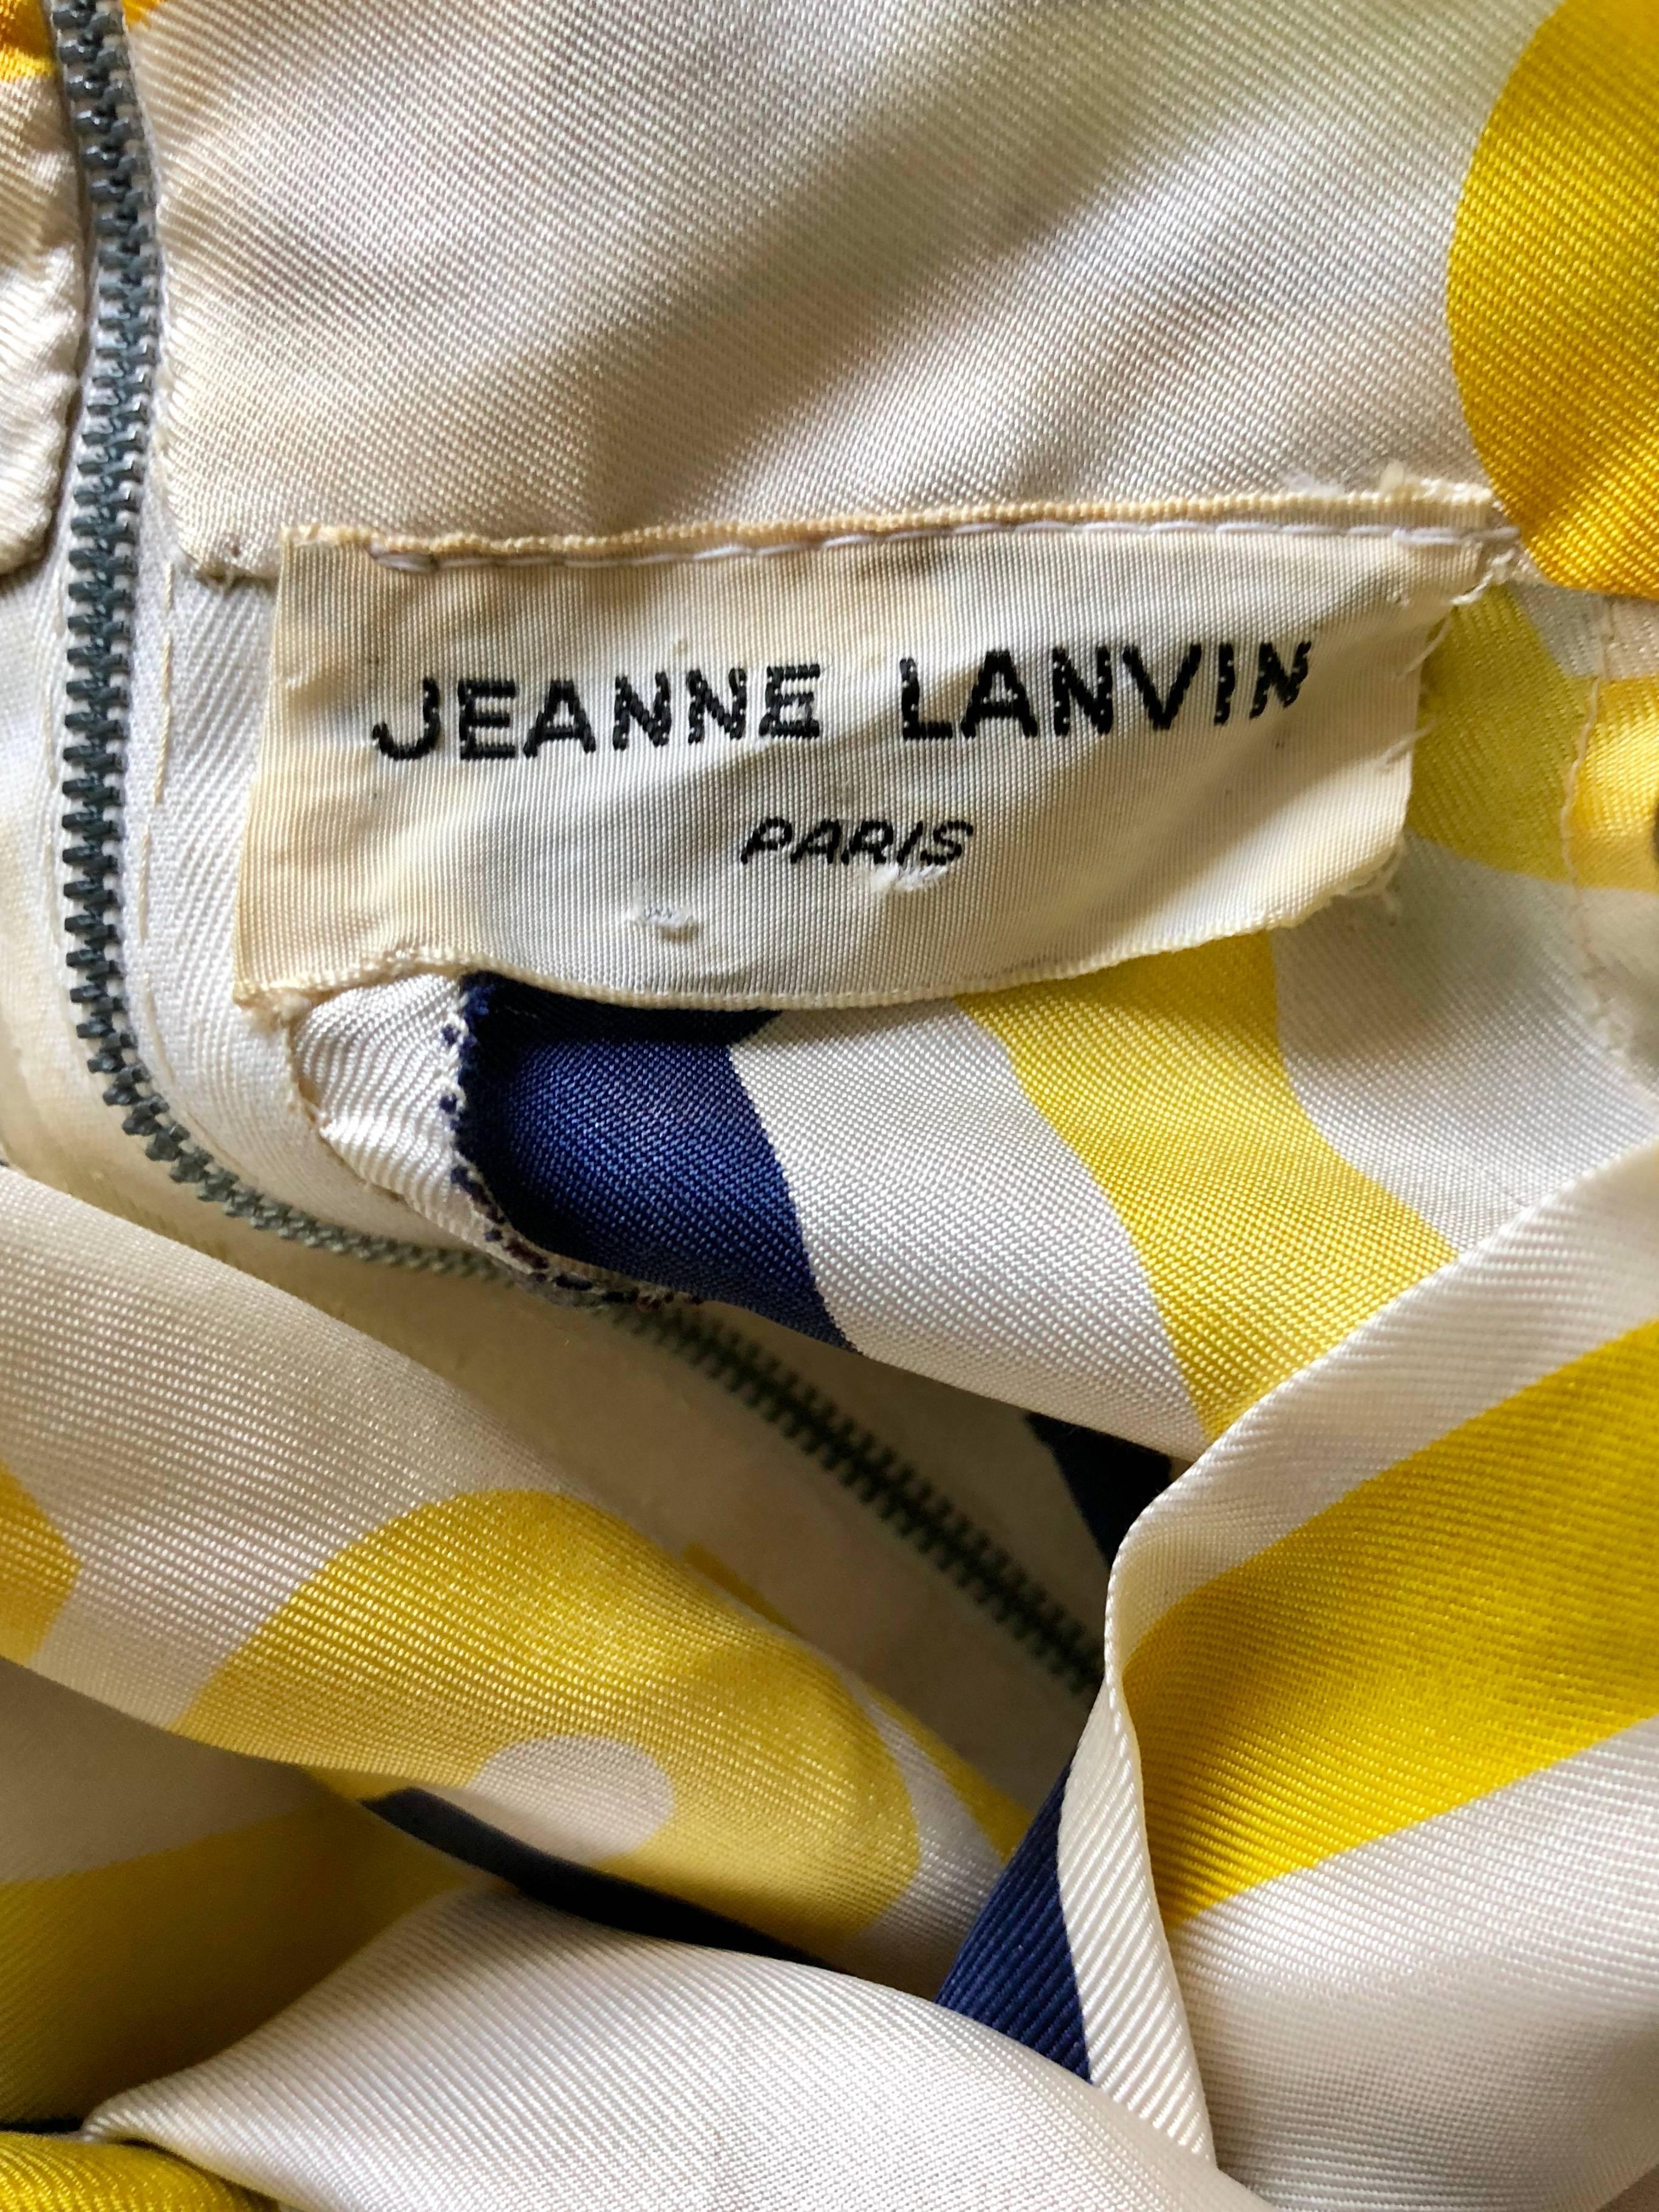 Chic 1960s JEANNE LANVIN couture navy blue, yellow and white sleeveless nautical silk top! Features a chain print throughout. Attached scarf at neck can be left down or tied into a pussycat bow. Full metal zipper up the back with hook-and-eye